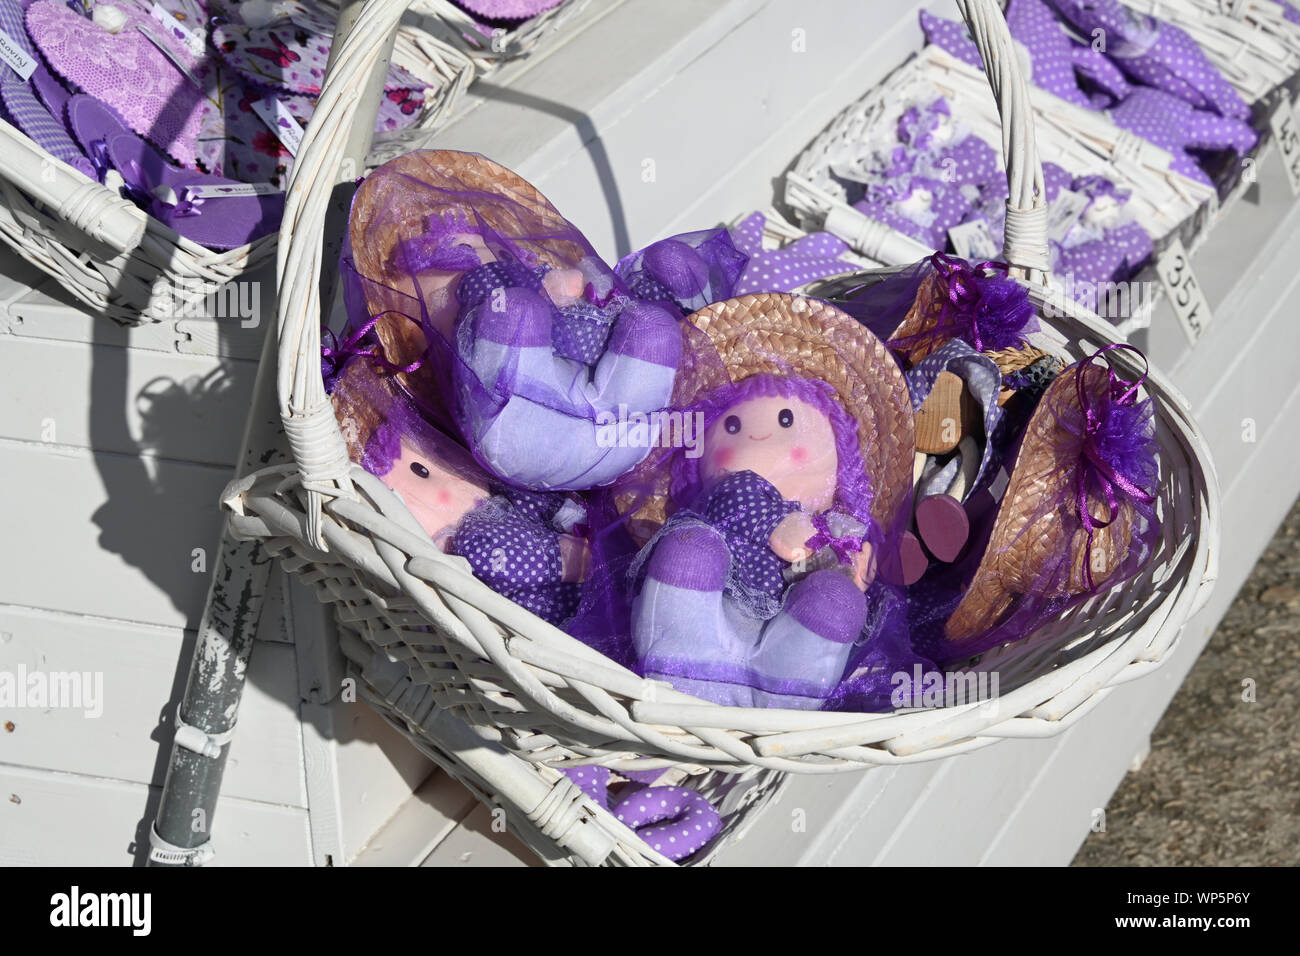 Souvenirs made with lavender, Croatia Stock Photo